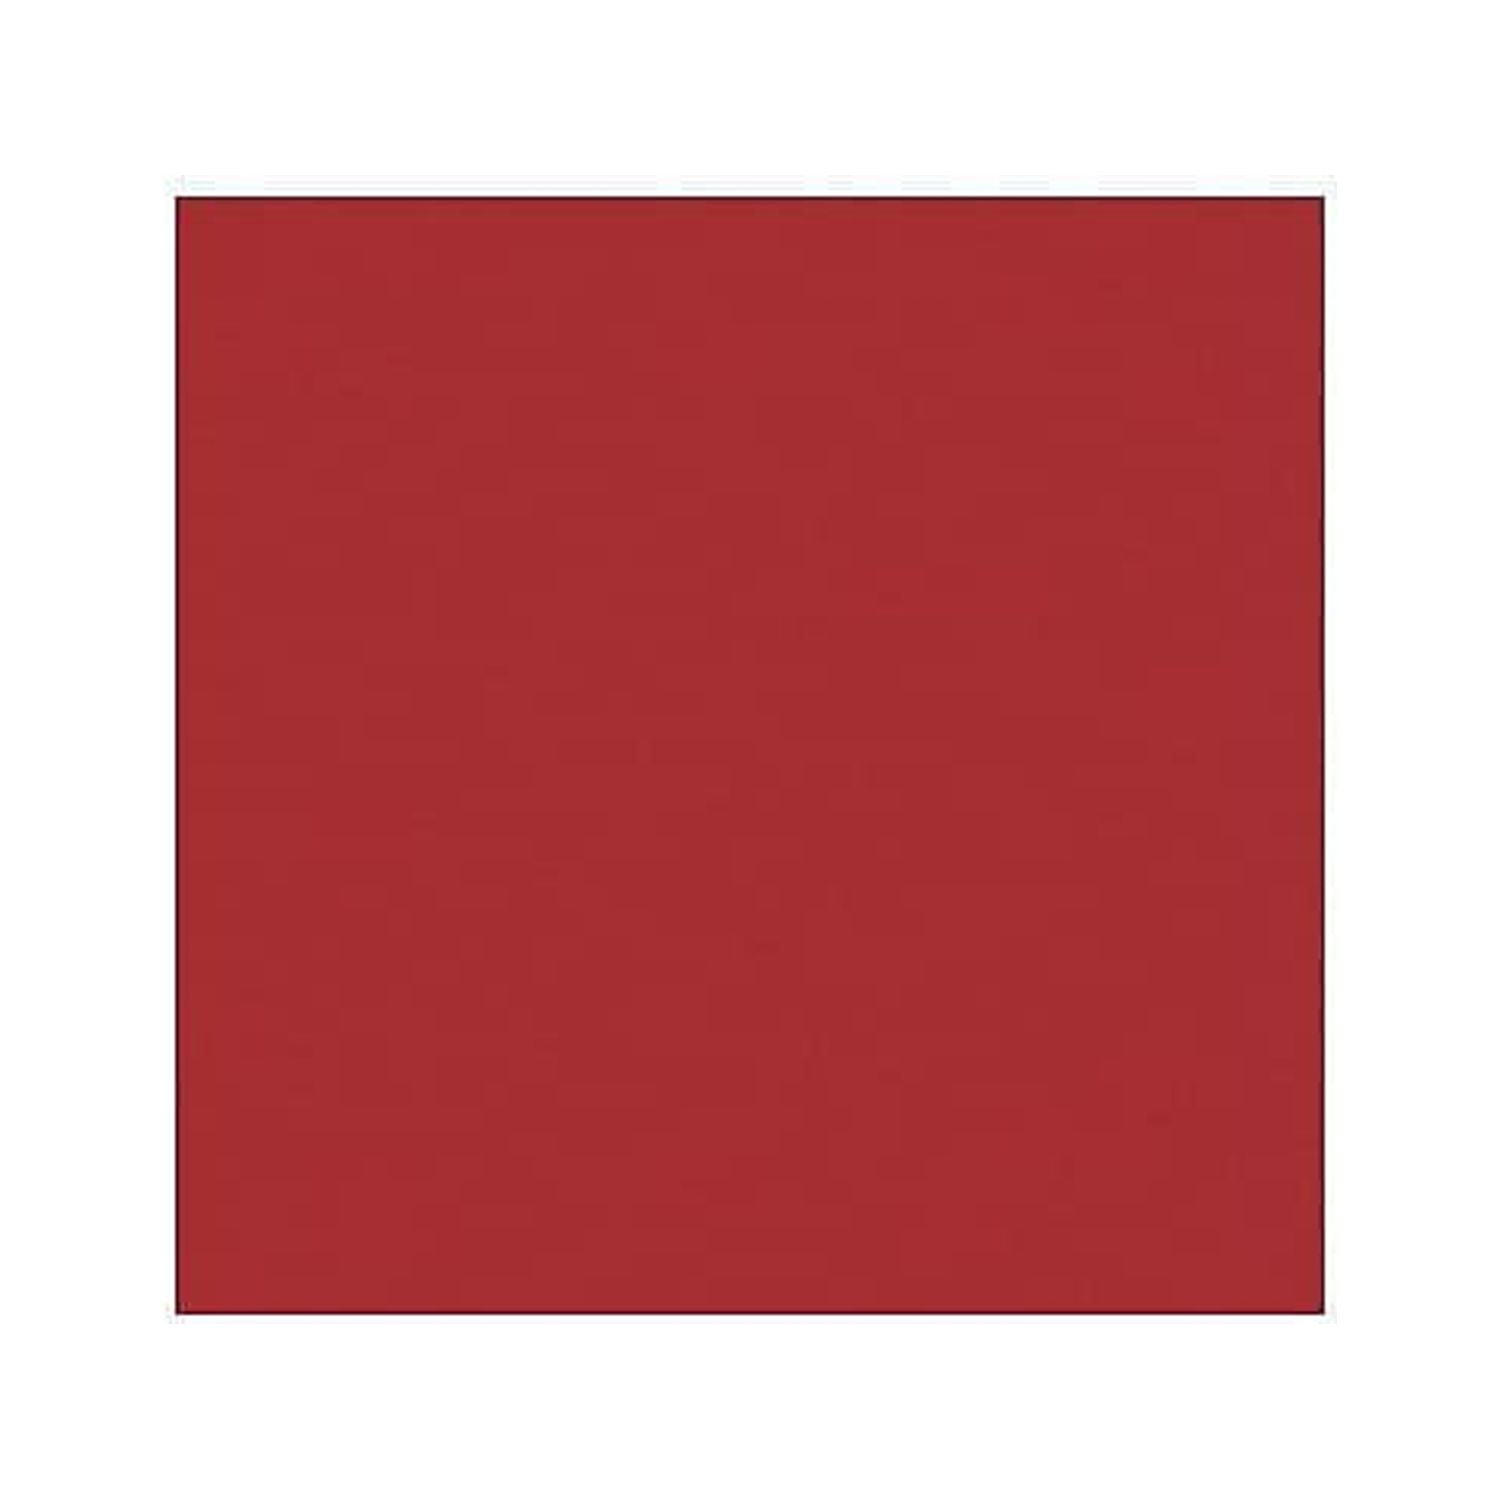 Lux Cardstock 13 x 19 inch Ruby Red 250/Pack 1319-C-18-250